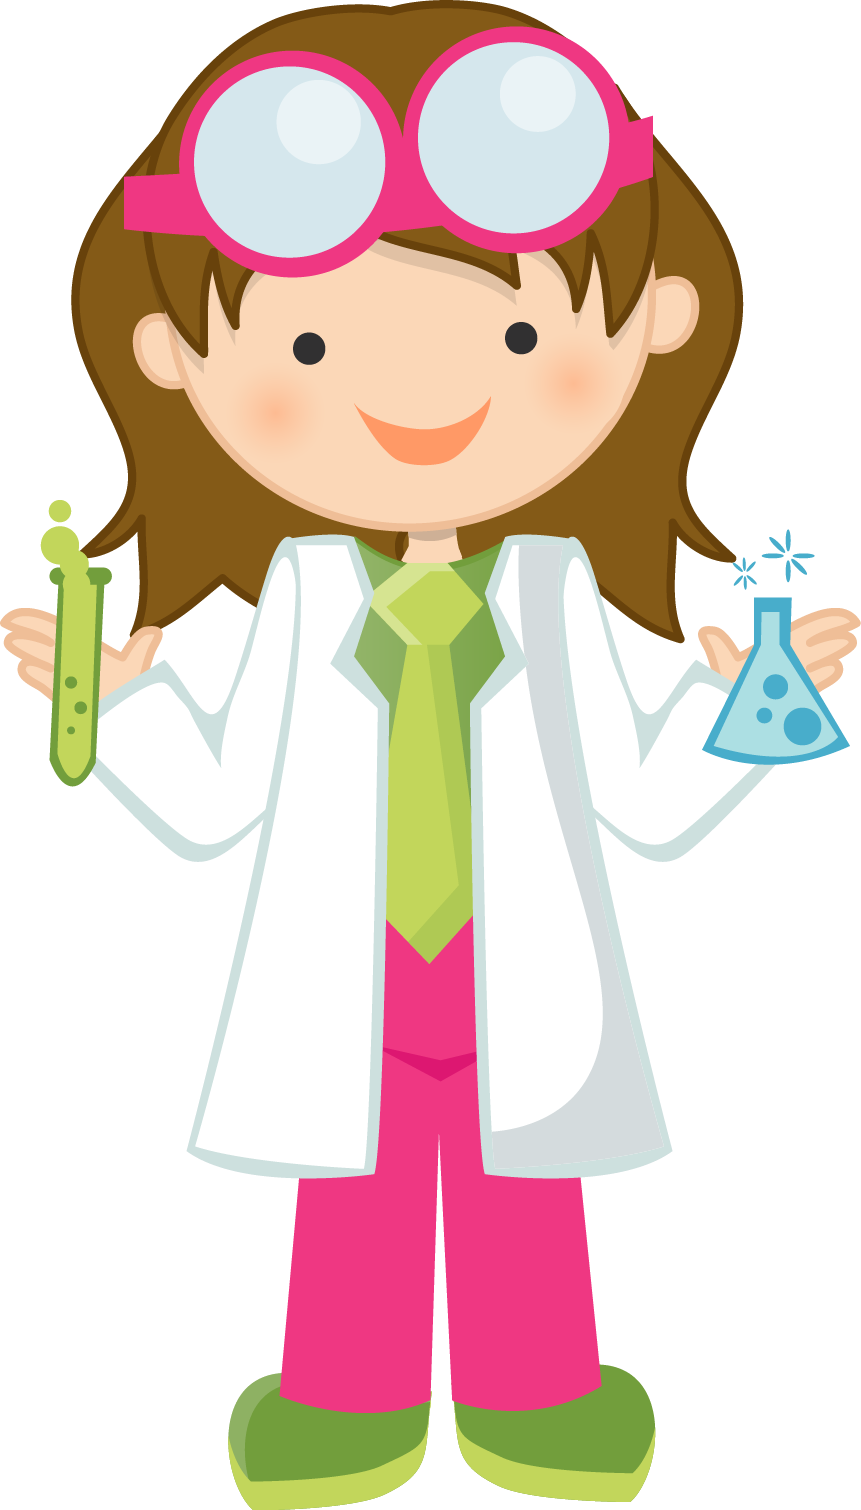 Young investigators ready for. Scientist clipart science material